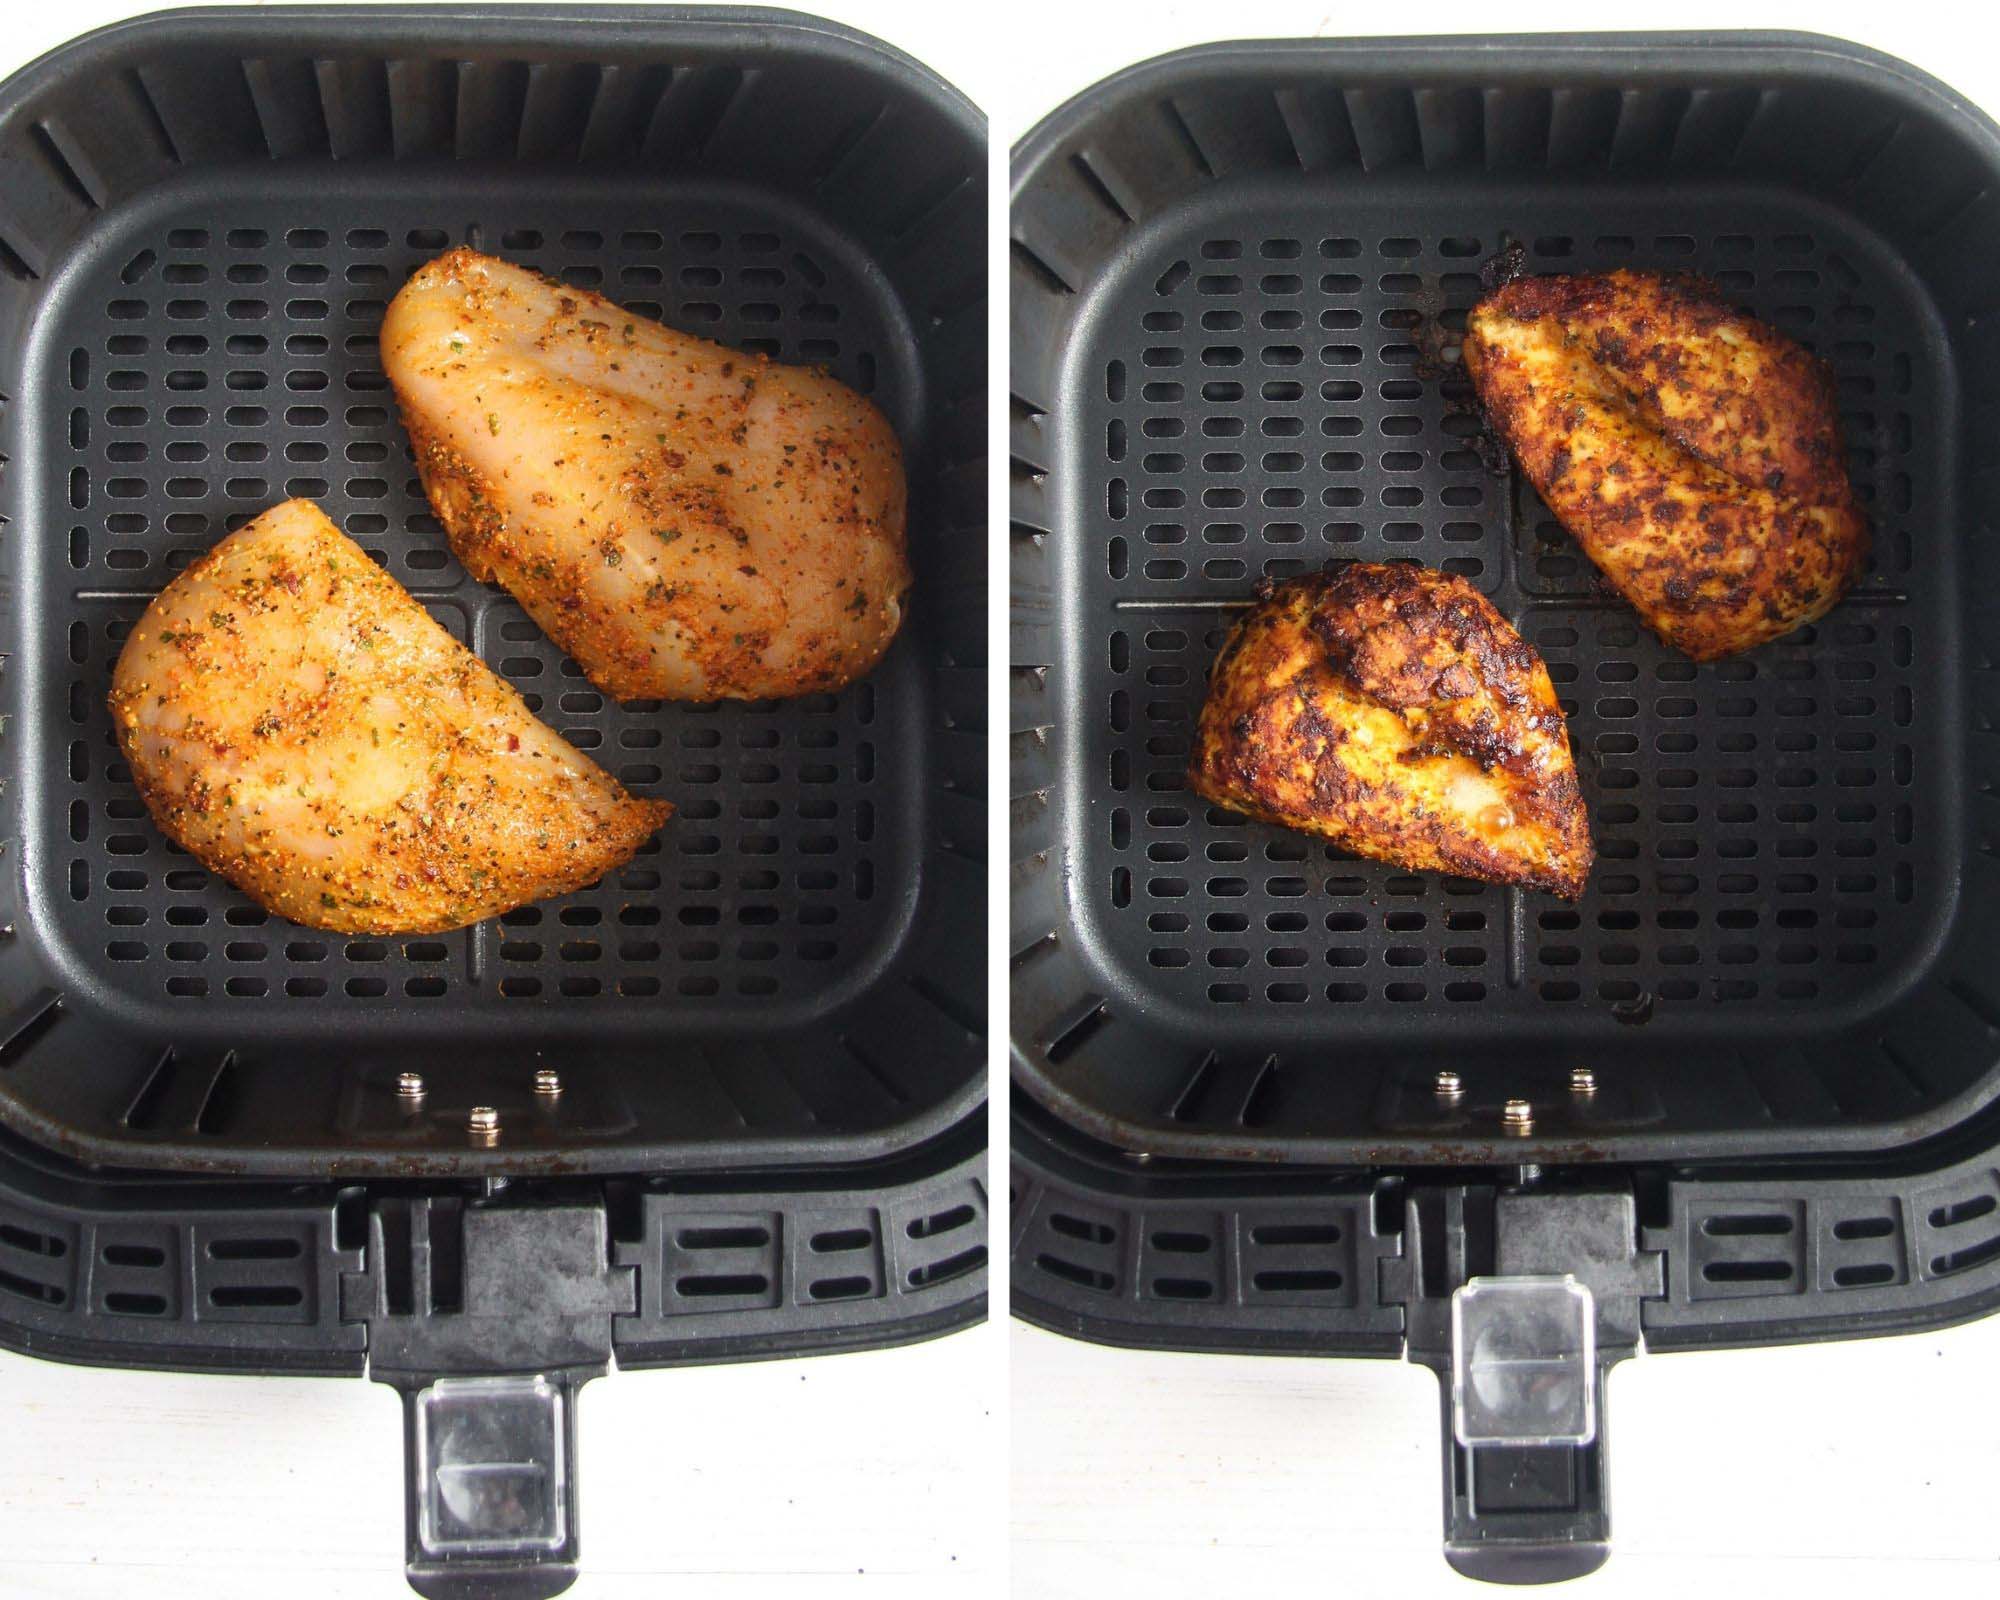 collage of two pictures showing chicken pieces in an air fryer basket.